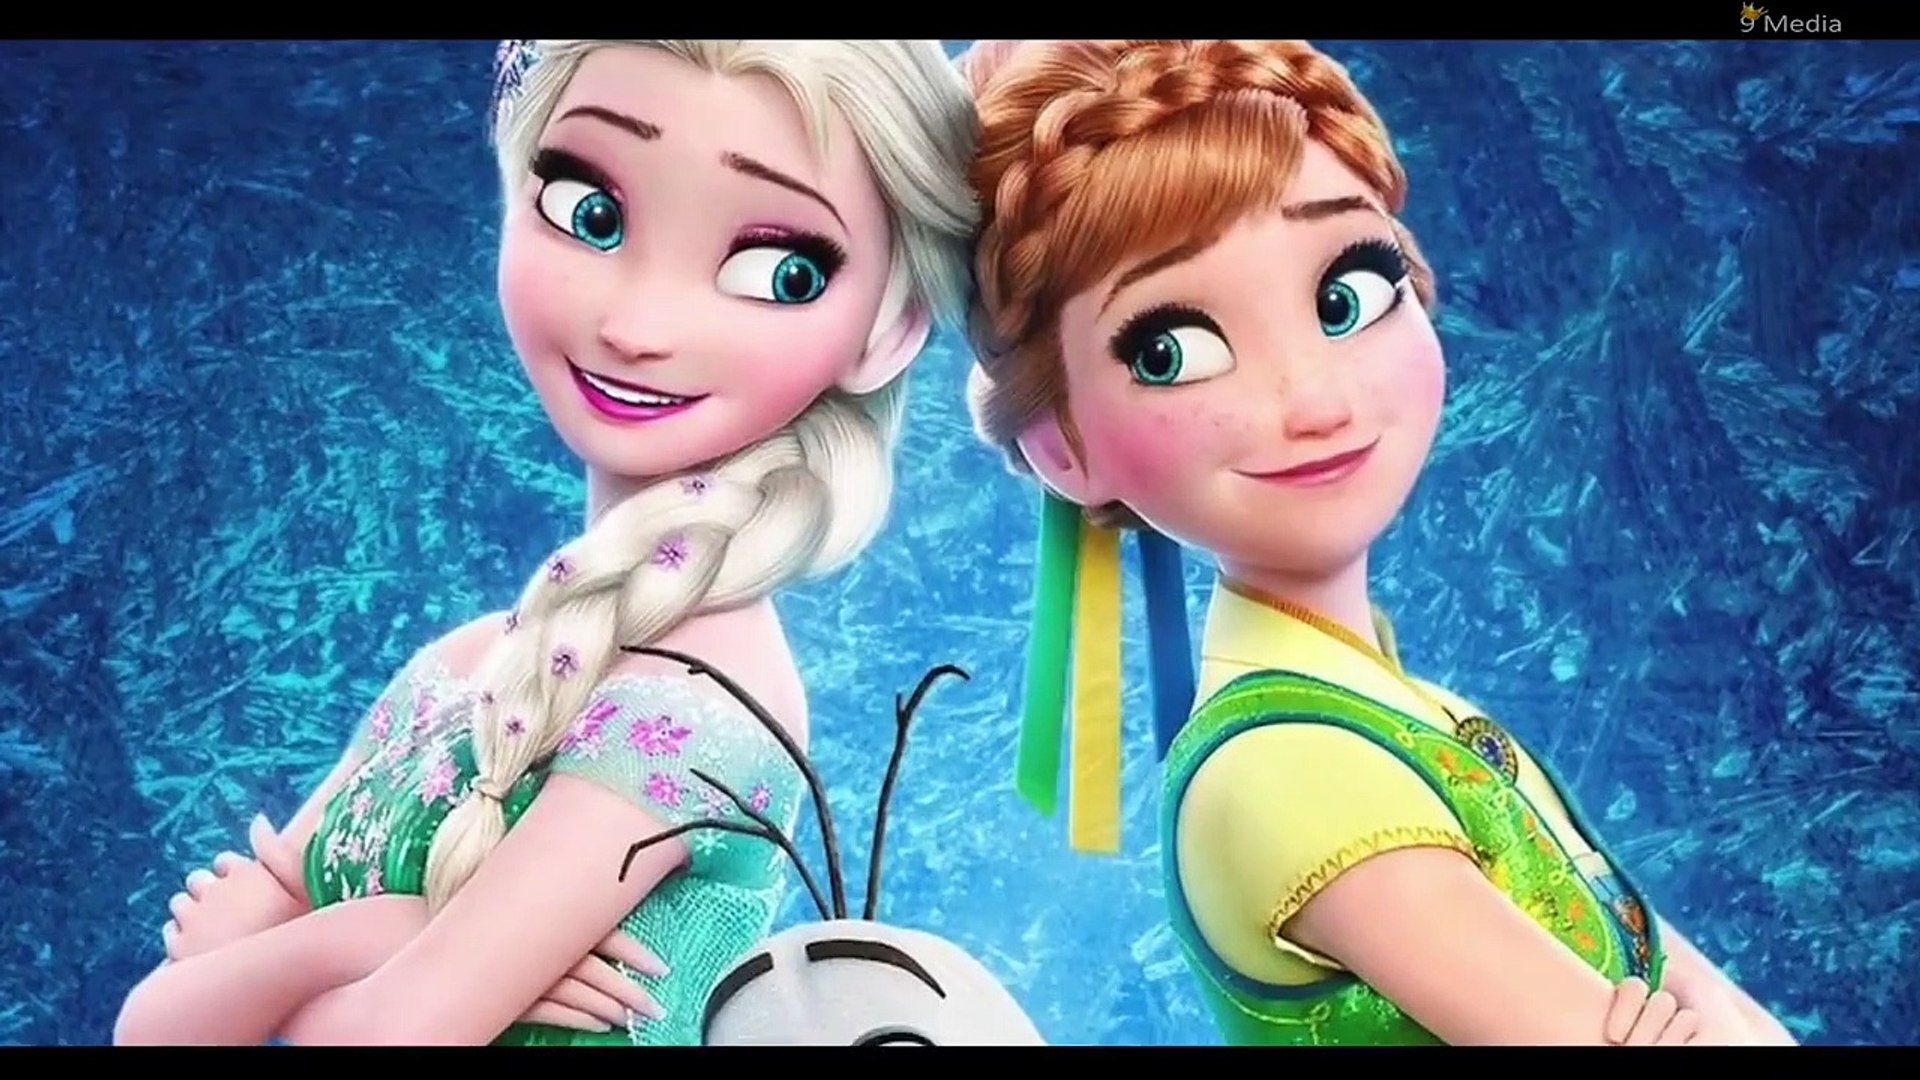  2 Update (2019) Official Trailer News, Frozen Elsa Sequel, New Animation  Movies HD - video Dailymotion